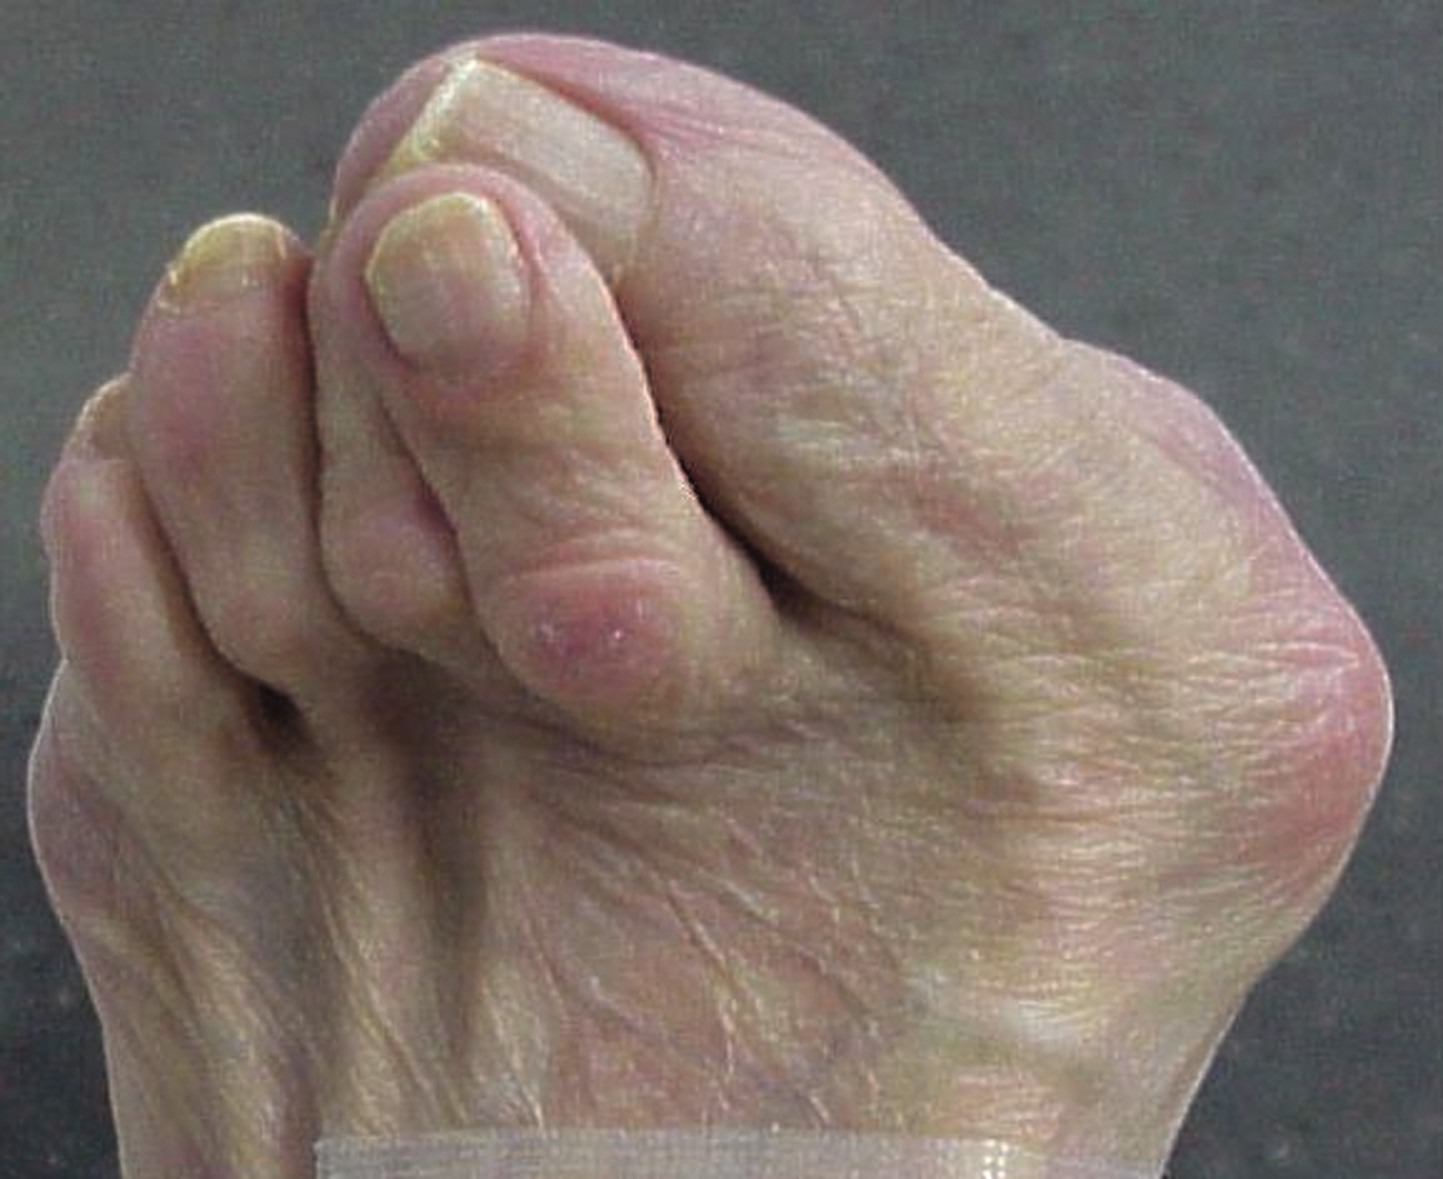 hammer toes Archives - Quality Foot Care